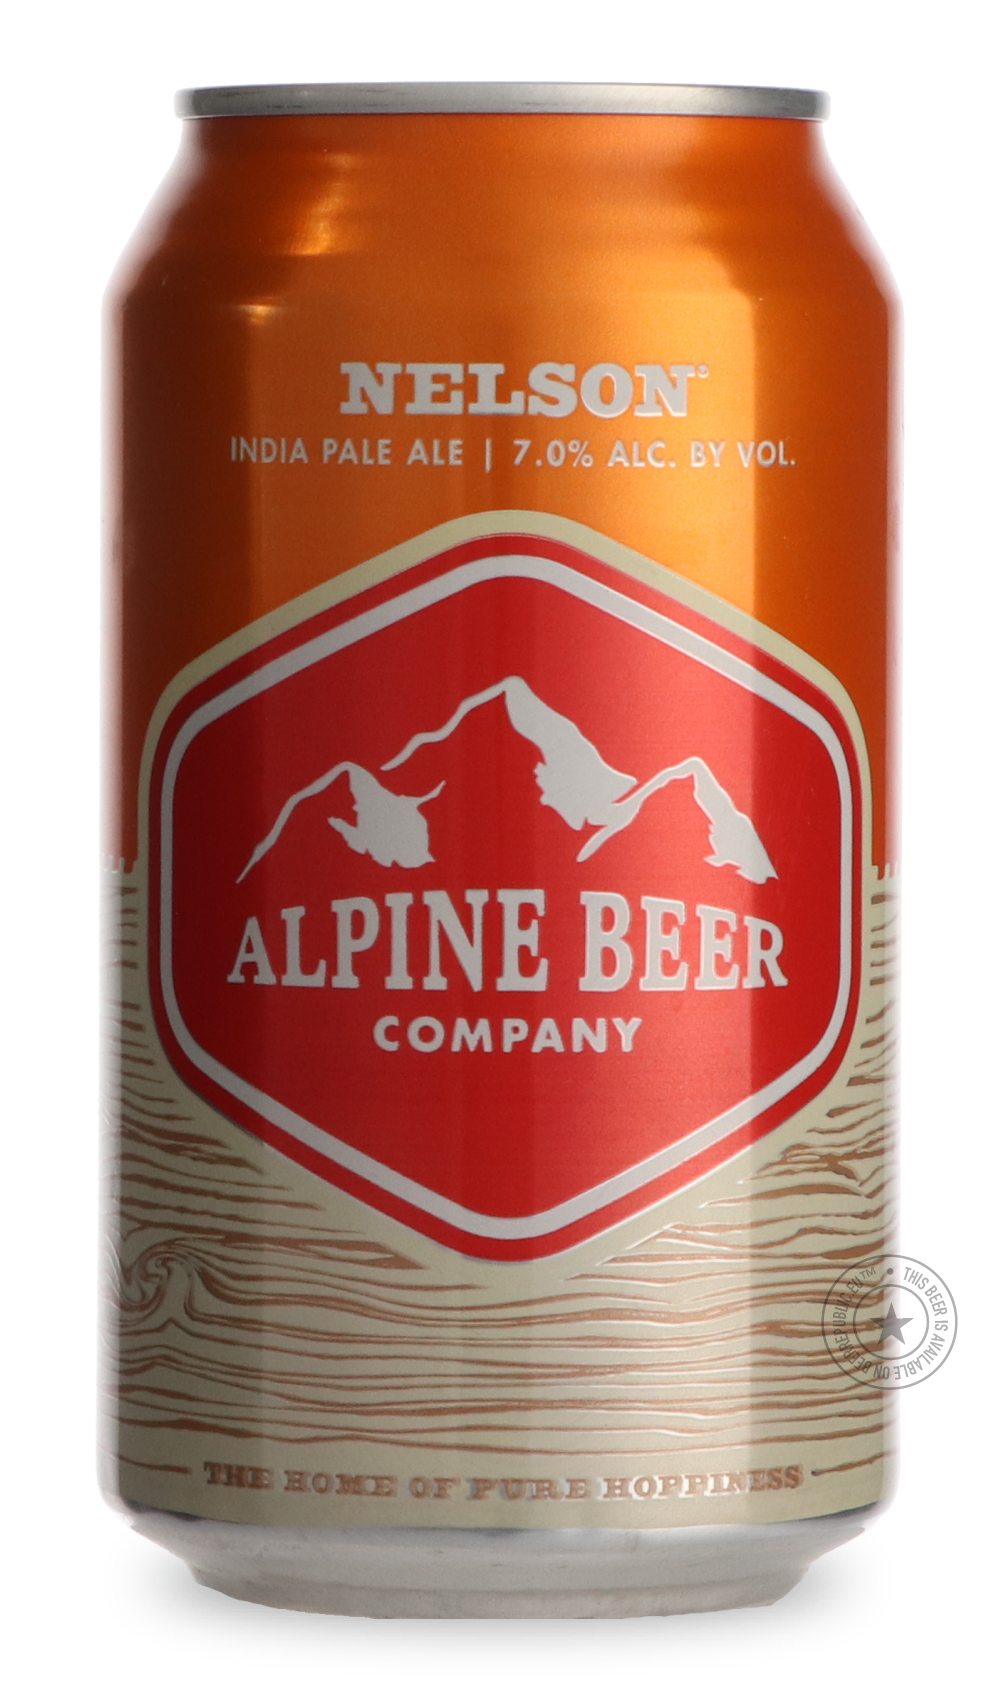 -Alpine- Nelson-IPA- Only @ Beer Republic - The best online beer store for American & Canadian craft beer - Buy beer online from the USA and Canada - Bier online kopen - Amerikaans bier kopen - Craft beer store - Craft beer kopen - Amerikanisch bier kaufen - Bier online kaufen - Acheter biere online - IPA - Stout - Porter - New England IPA - Hazy IPA - Imperial Stout - Barrel Aged - Barrel Aged Imperial Stout - Brown - Dark beer - Blond - Blonde - Pilsner - Lager - Wheat - Weizen - Amber - Barley Wine - Qua